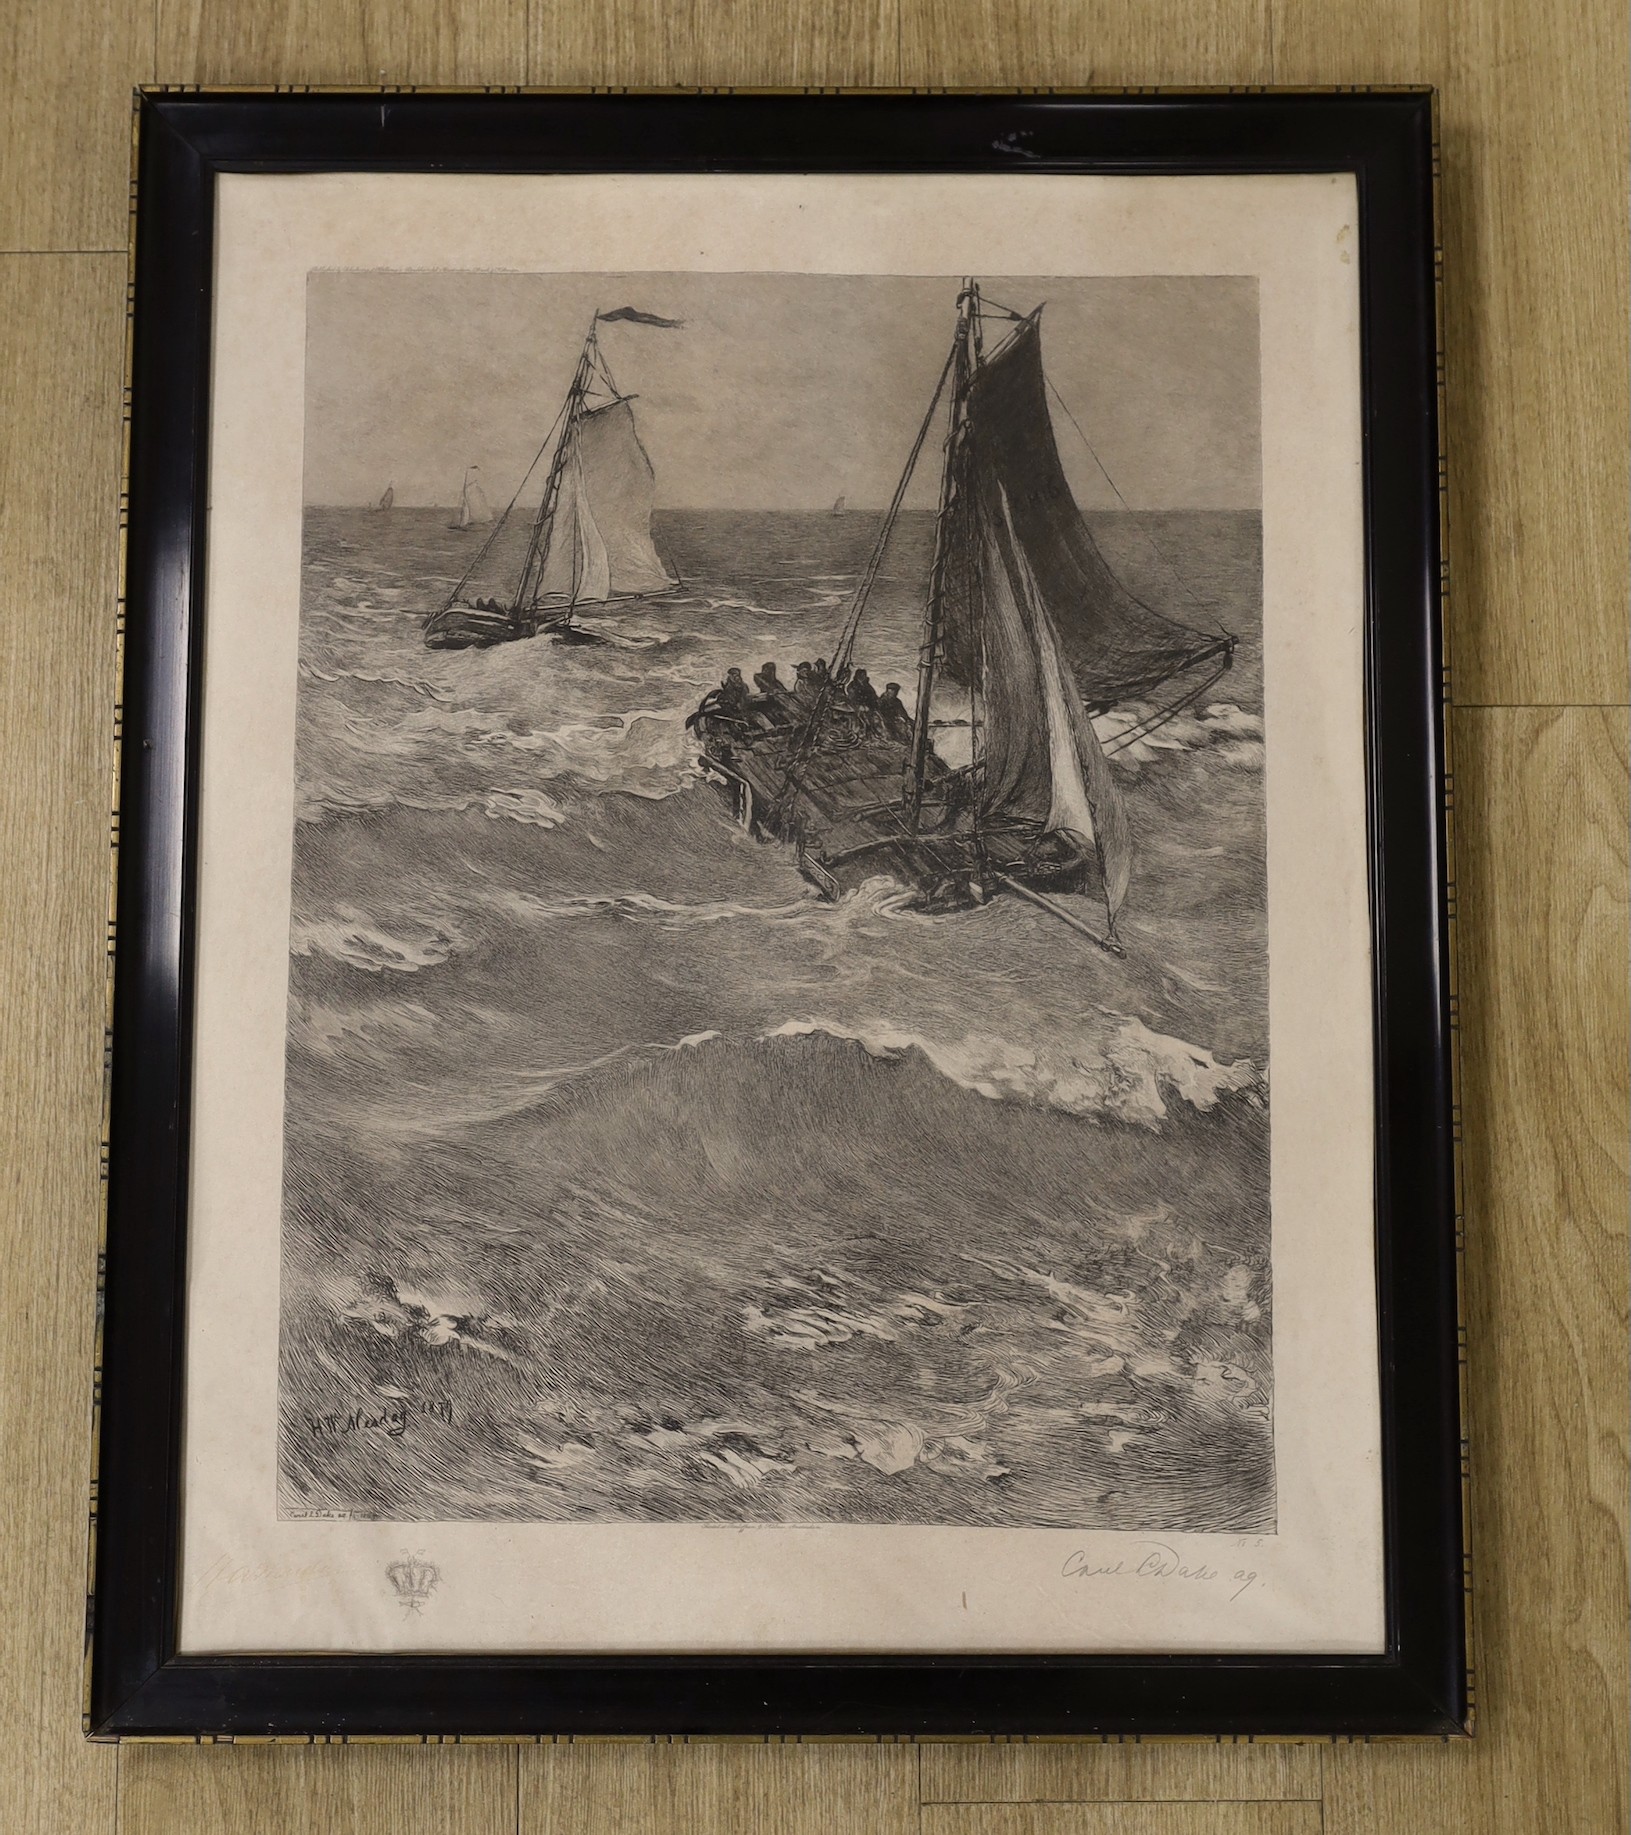 After, Hendrik Willem Mesdag, engraving, Scheveningen boats in the surf, signed Carel L. outside the plate, published by Roeloffzen & Hübner, Amsterdam, 68 x 53cm